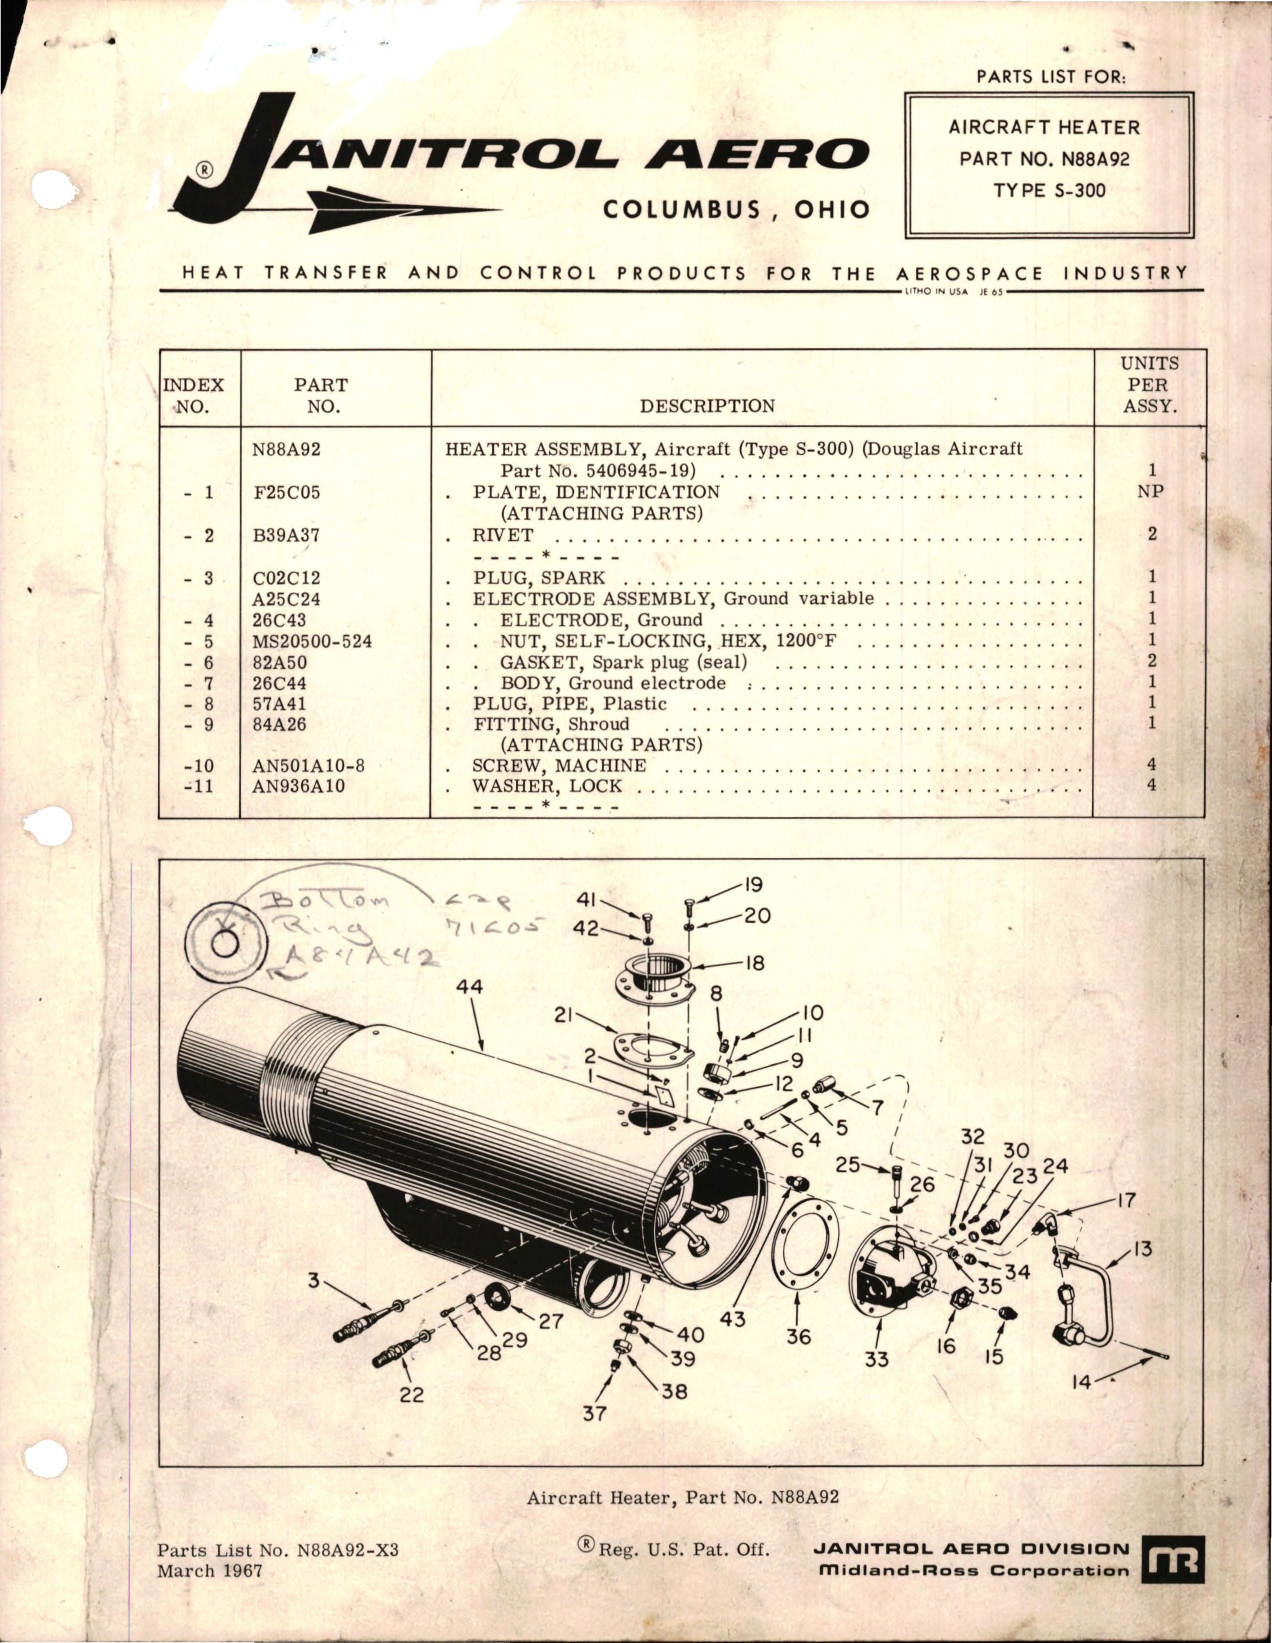 Sample page 1 from AirCorps Library document: Parts List for Aircraft Heater - Part N88A92 - Type S-300